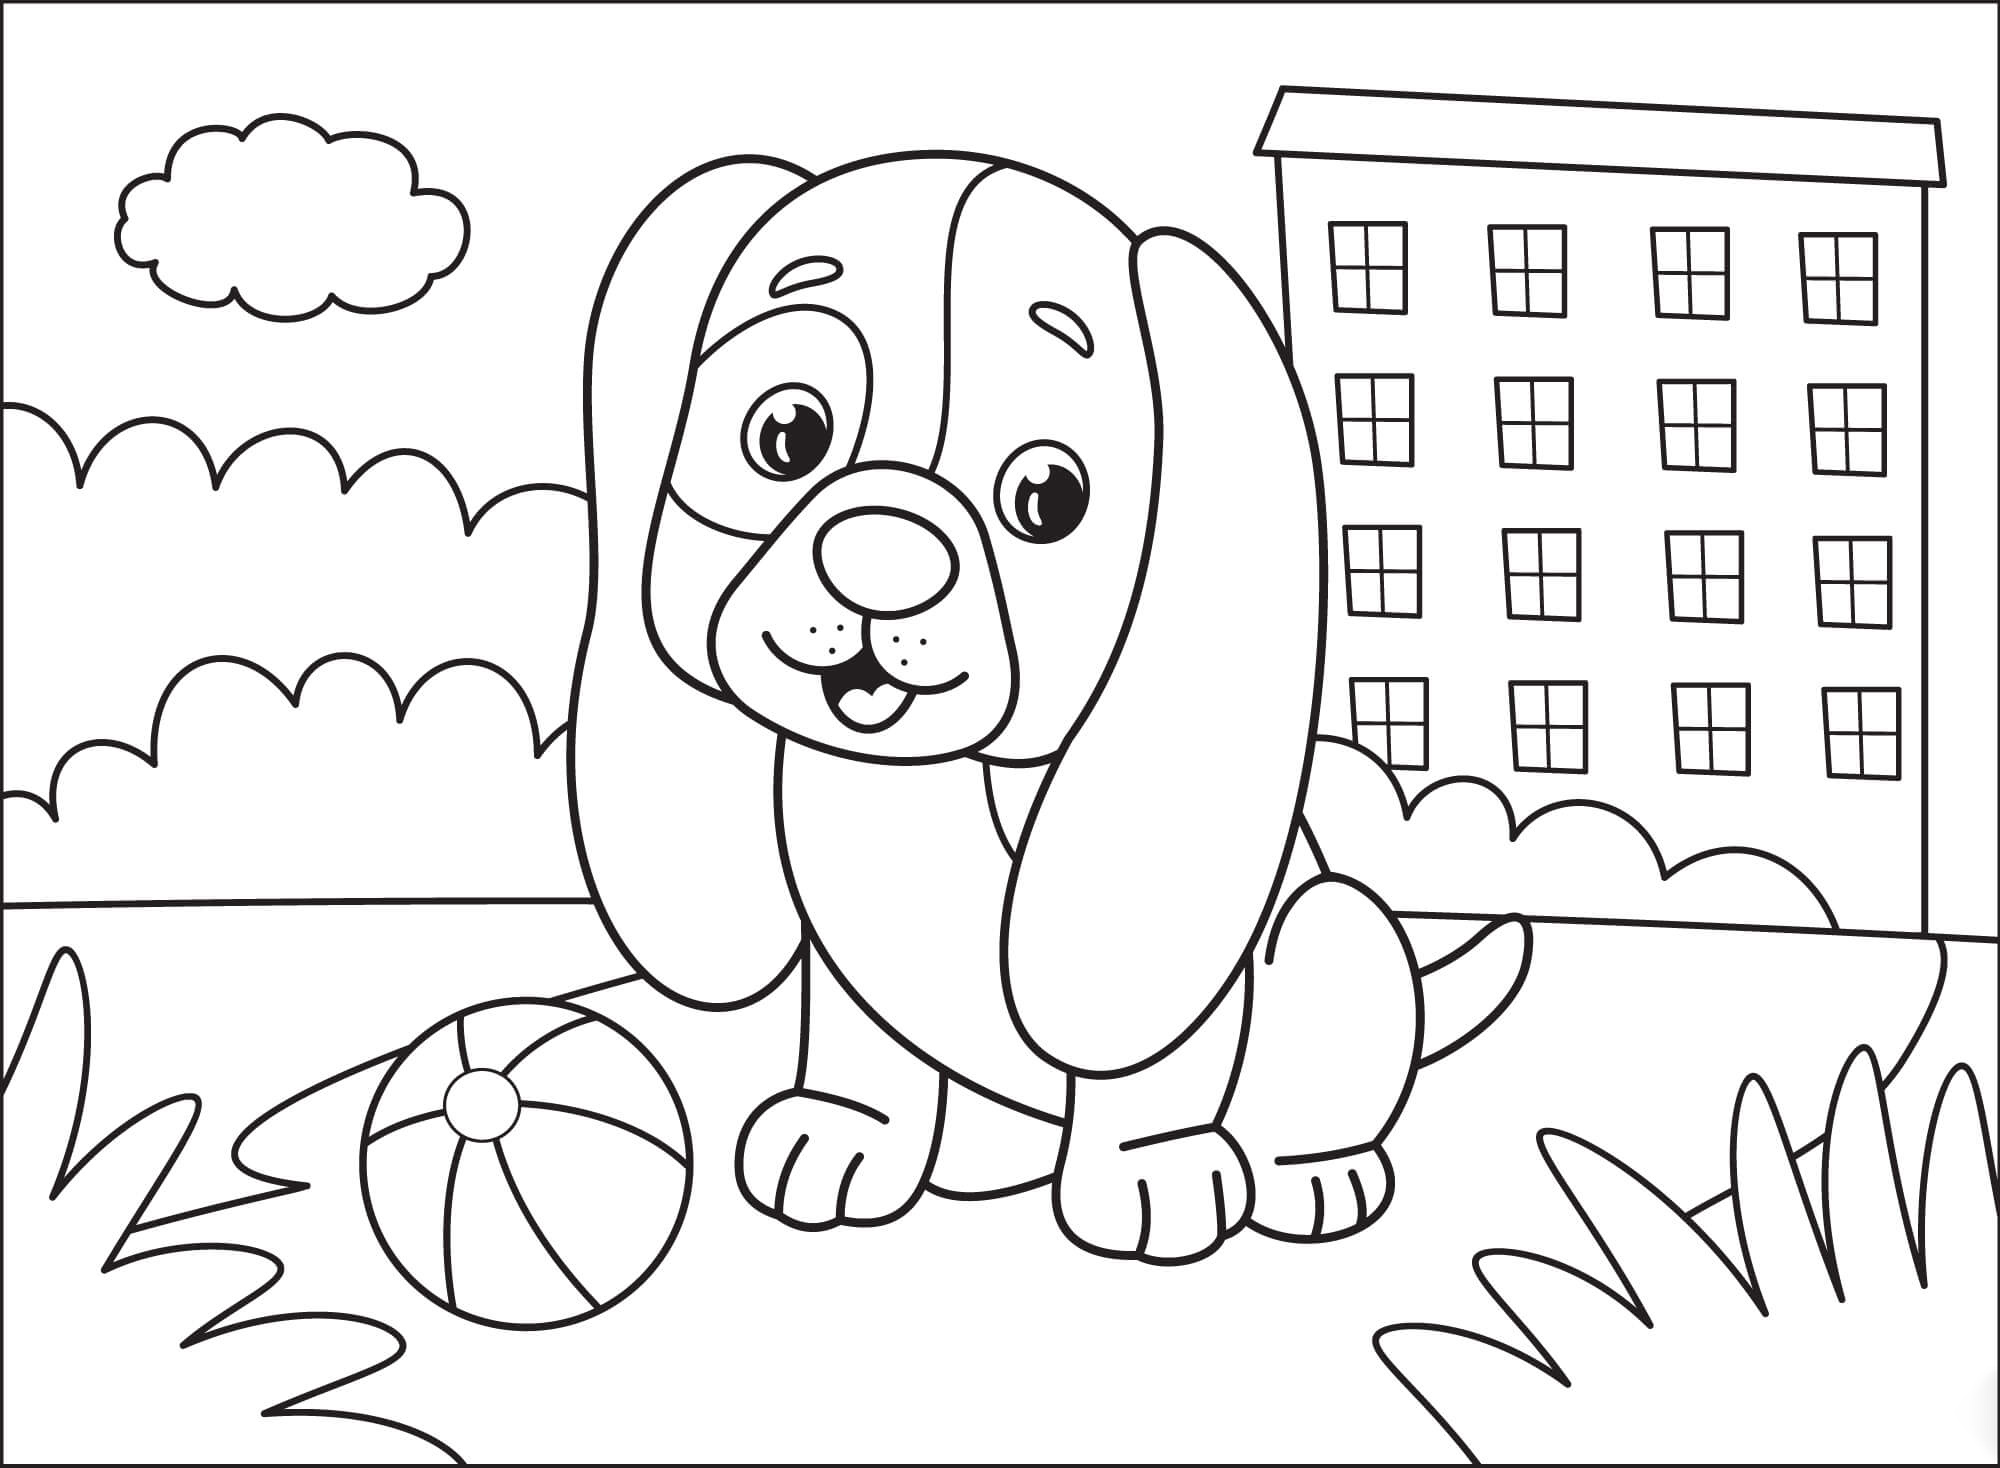 Puppy with long ears coloring page